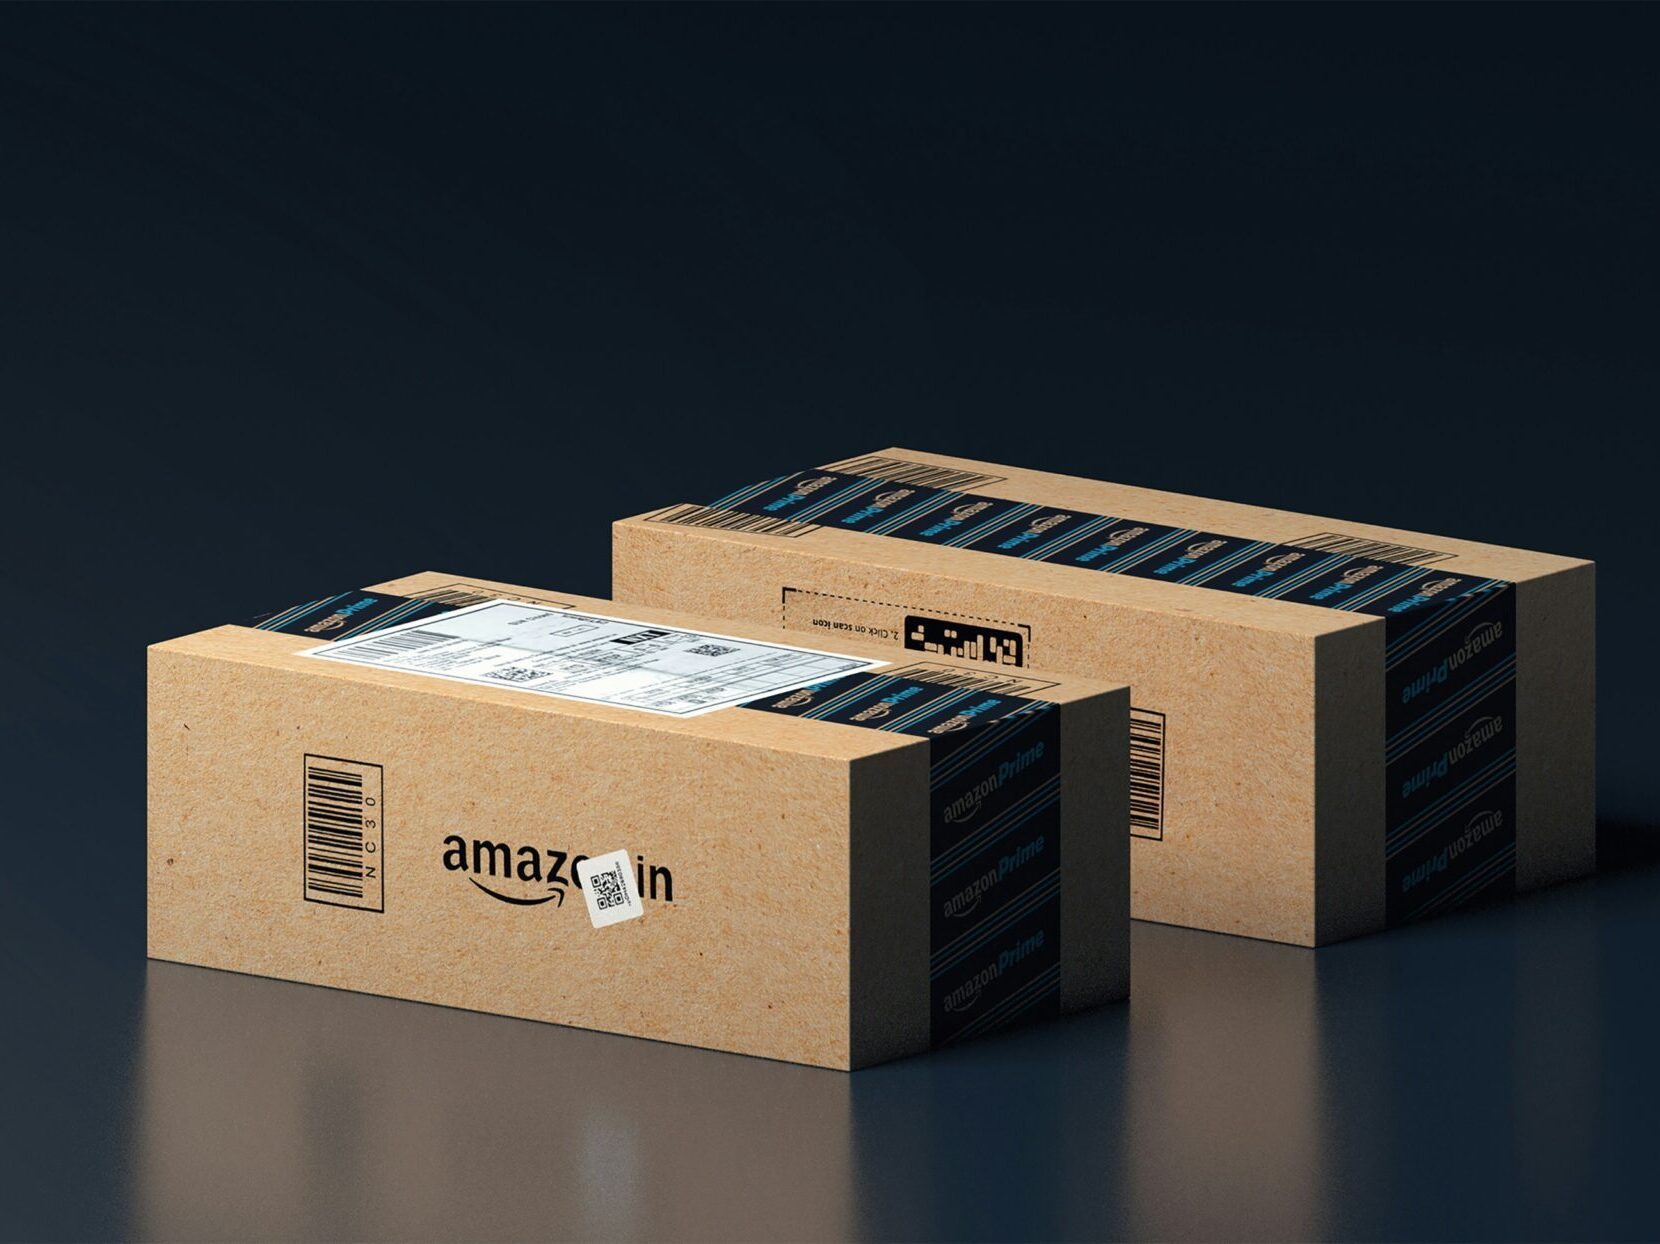 2 amazon boxes on dark table with black background